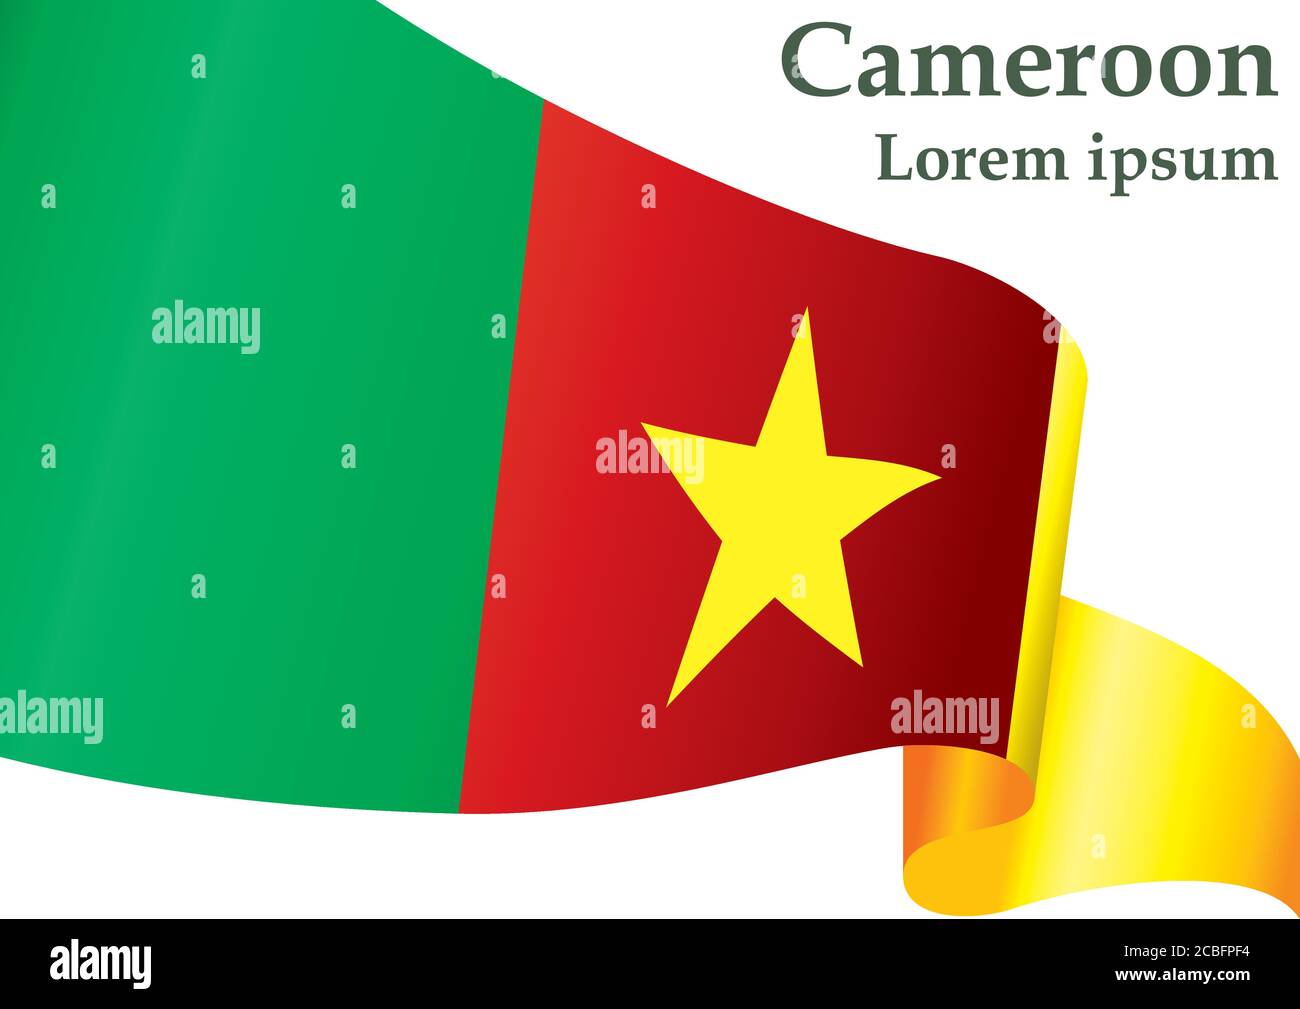 Flag of Cameroon, Republic of Cameroon. Template for award design, an official document with the flag of Cameroon. Stock Vector